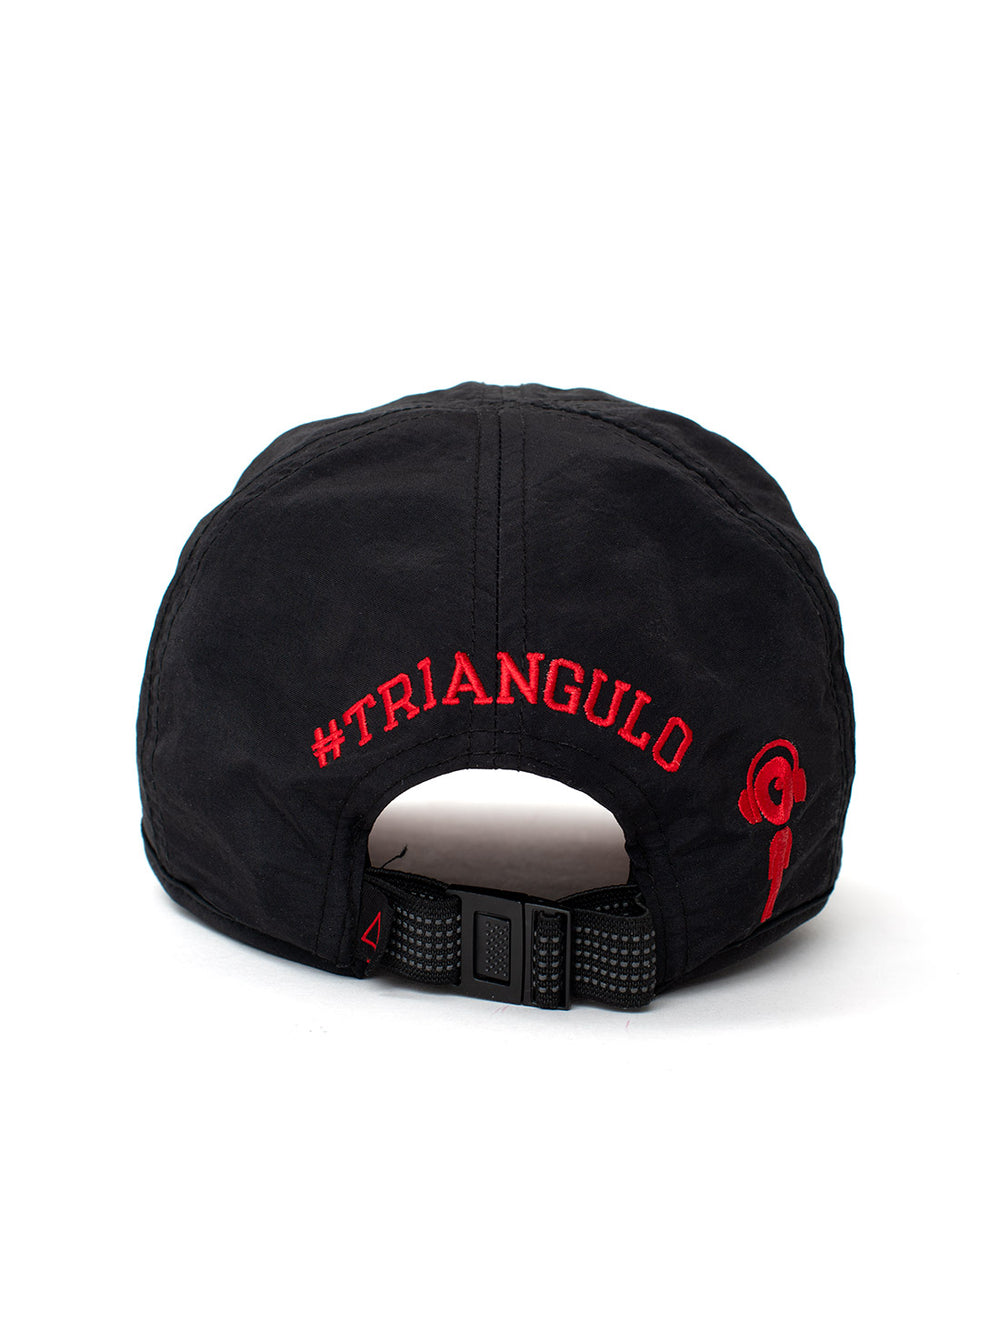 DRY FIT Rose DAD hat - Triangulo Swag